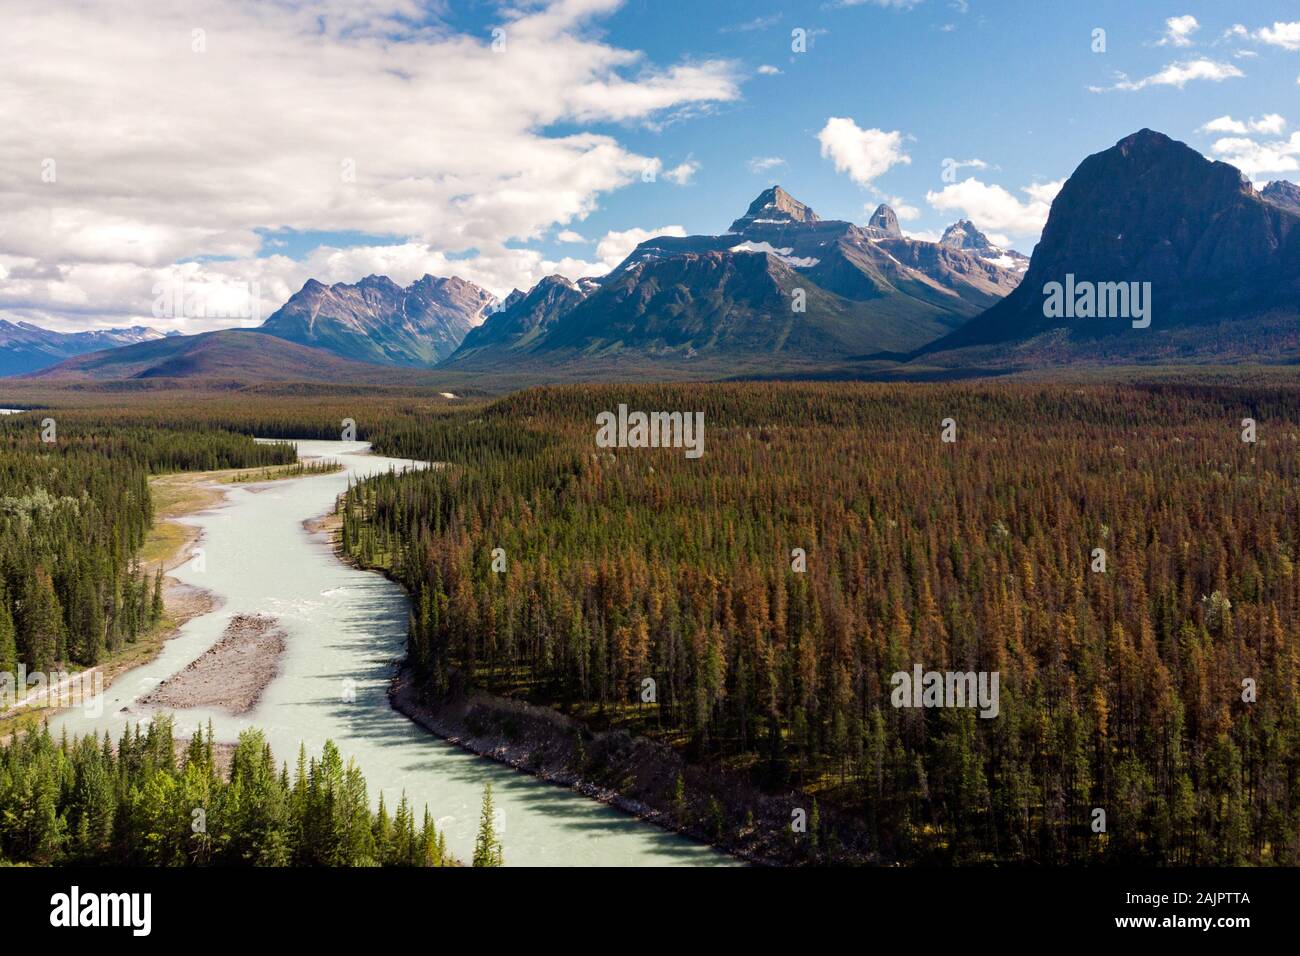 Aerial view of Banff National Park during summer, Canadian Rockies, Alberta, Canada. Stock Photo